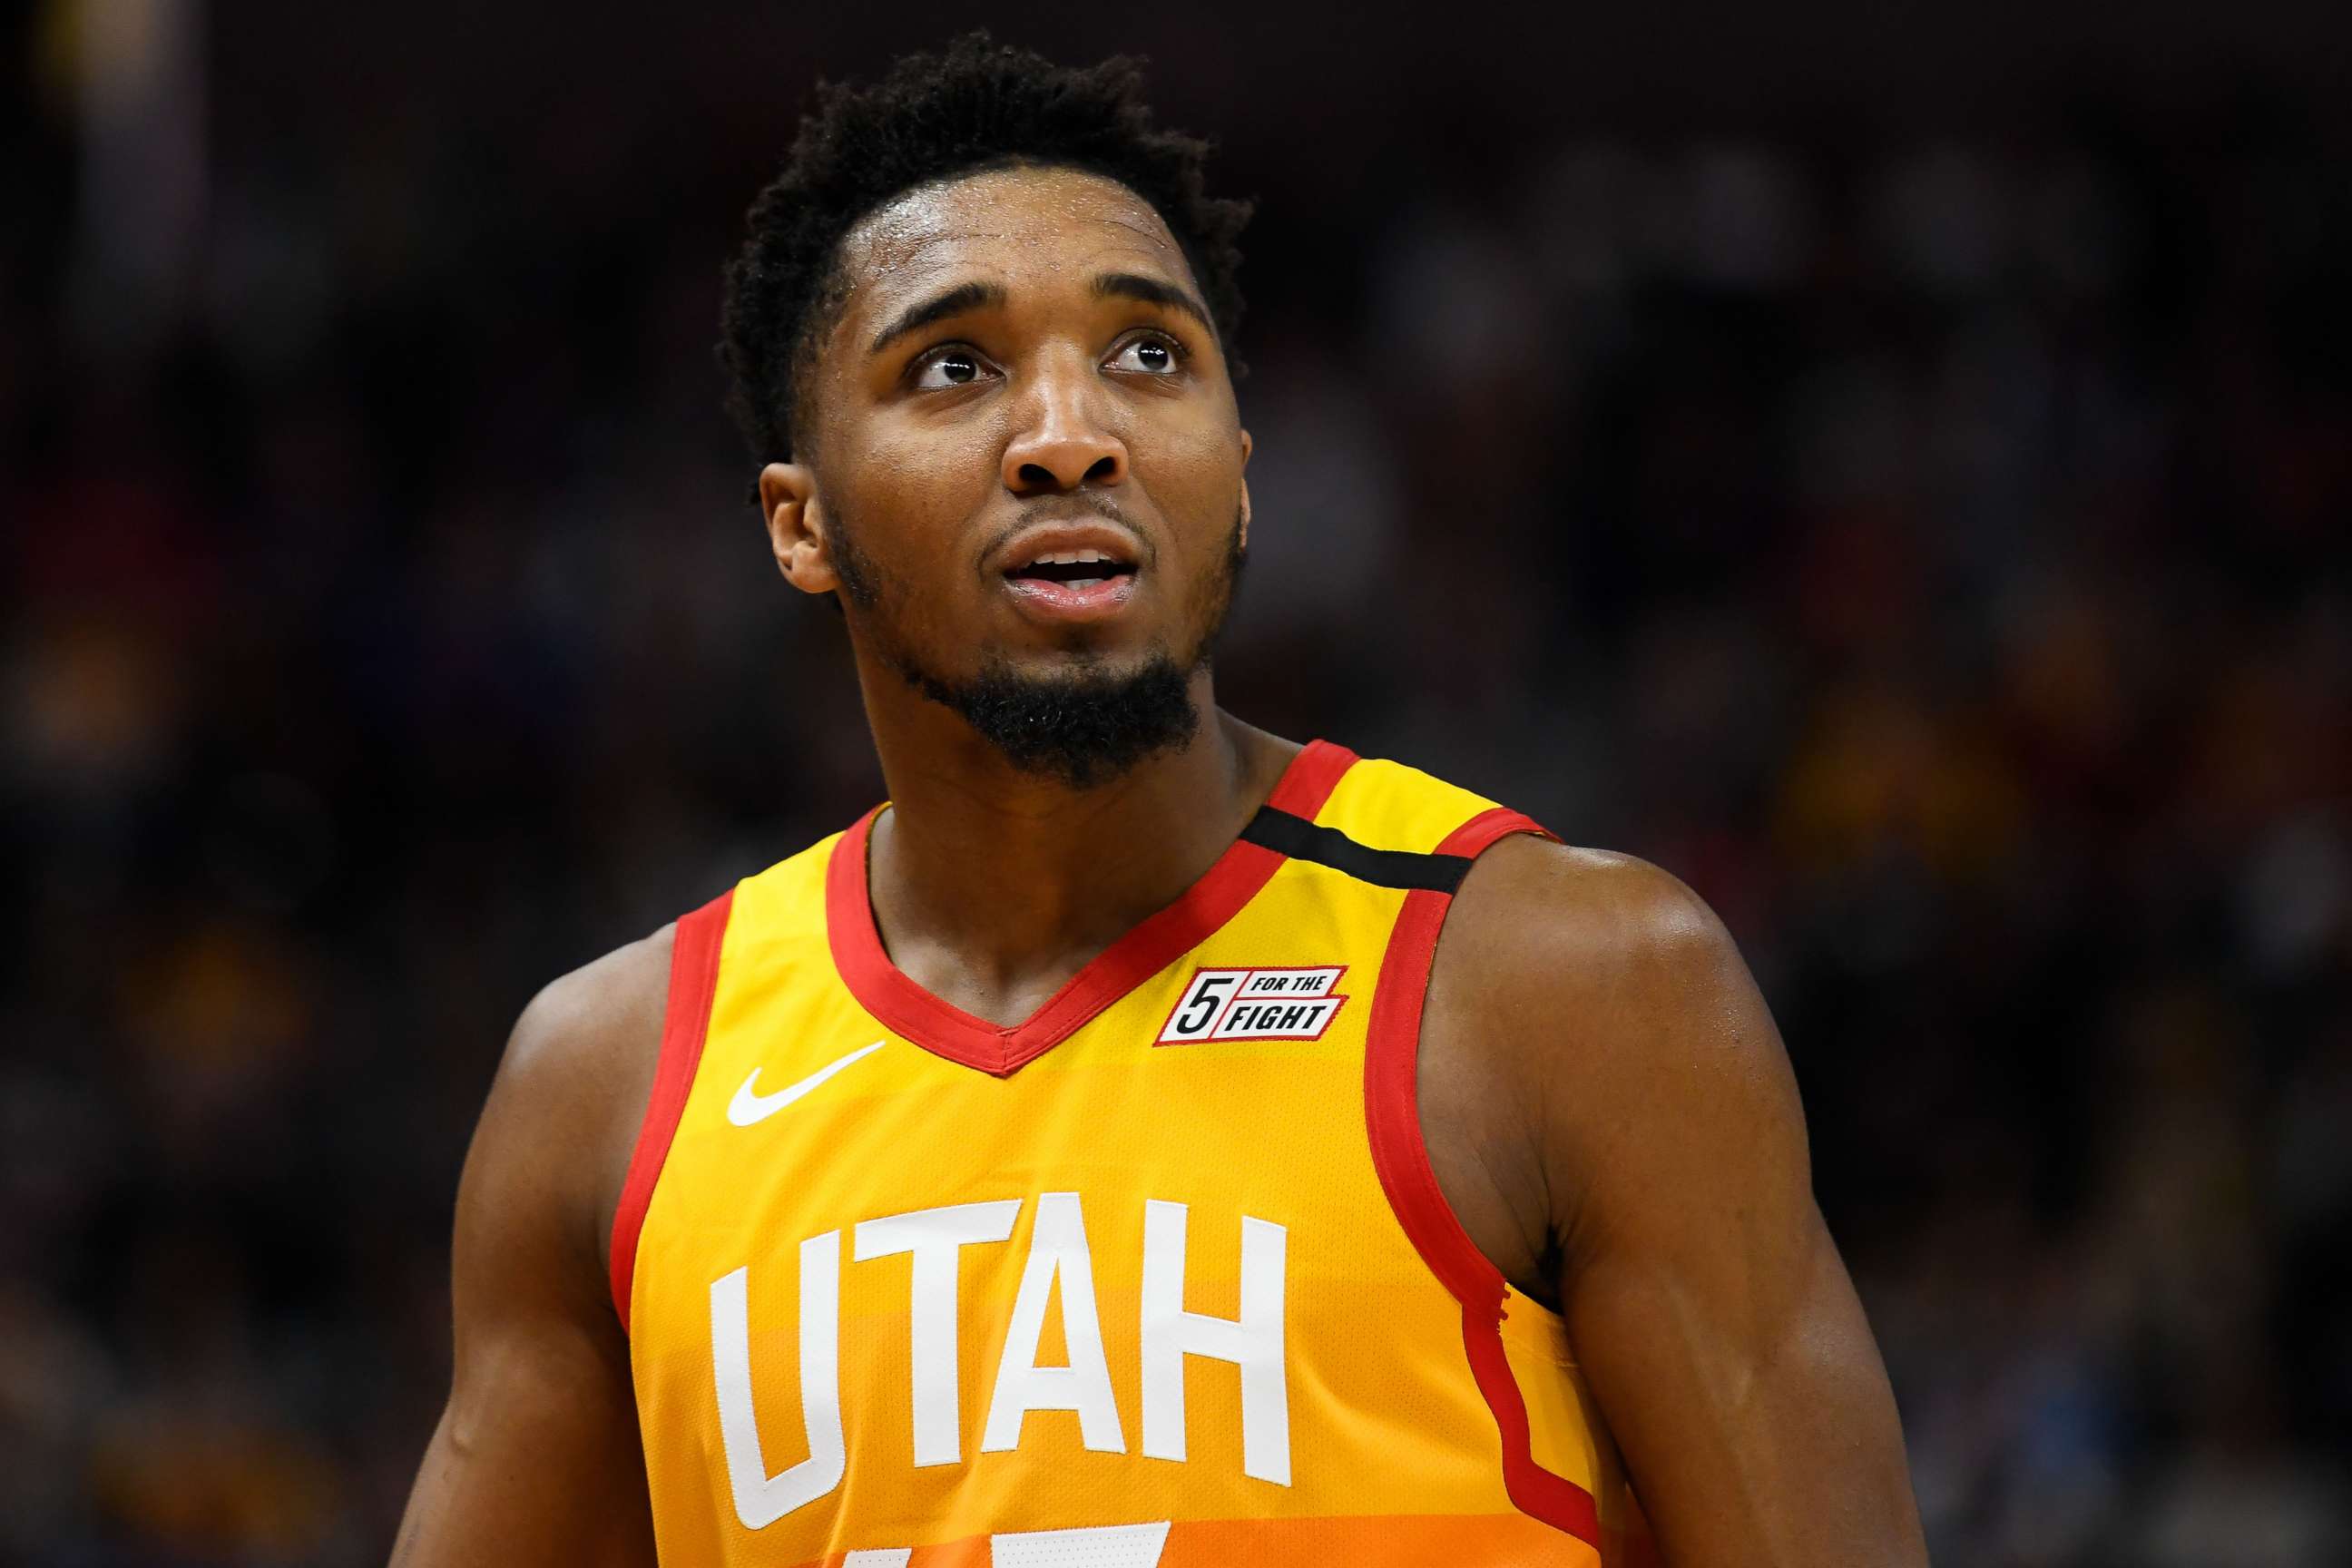 PHOTO: Donovan Mitchell of the Utah Jazz during a game against the Toronto Raptors at Vivint Smart Home Arena on March 9, 2020 in Salt Lake City, Utah.